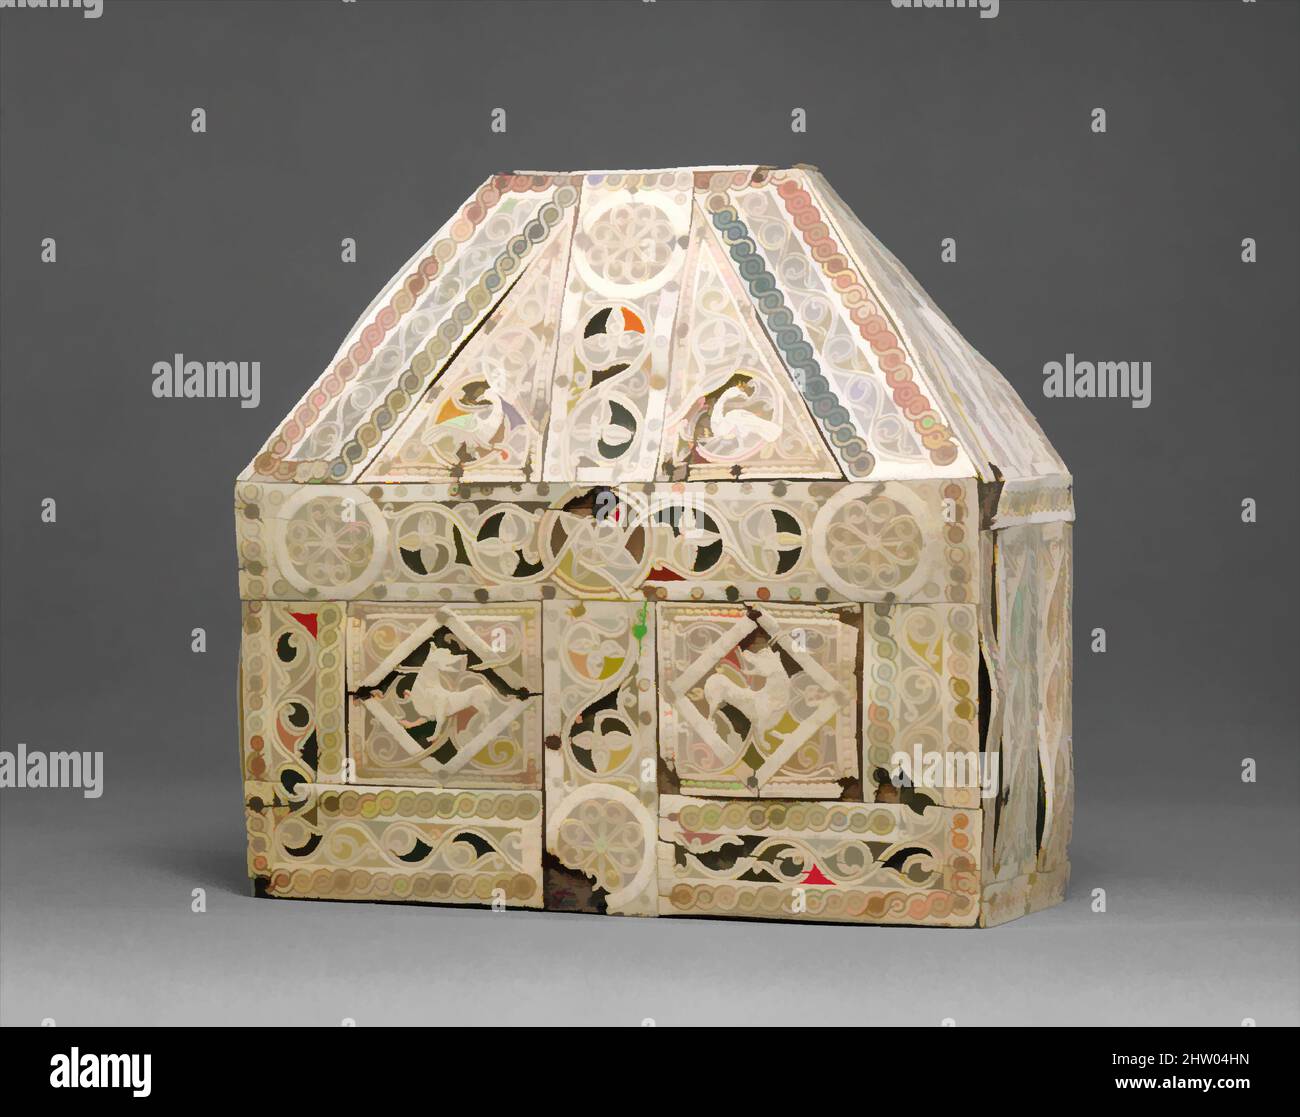 Art inspired by Bursa Reliquary, 10th century, North Italian, Bone, copper-gilt, wood, Overall: 7 3/4 x 7 5/16 x 3 1/4in. (19.7 x 18.6 x 8.3cm), Ivories, The flat, geometric, and abstract style of the designs on this reliquary is similar to ivory carvings and architectural decoration, Classic works modernized by Artotop with a splash of modernity. Shapes, color and value, eye-catching visual impact on art. Emotions through freedom of artworks in a contemporary way. A timeless message pursuing a wildly creative new direction. Artists turning to the digital medium and creating the Artotop NFT Stock Photo